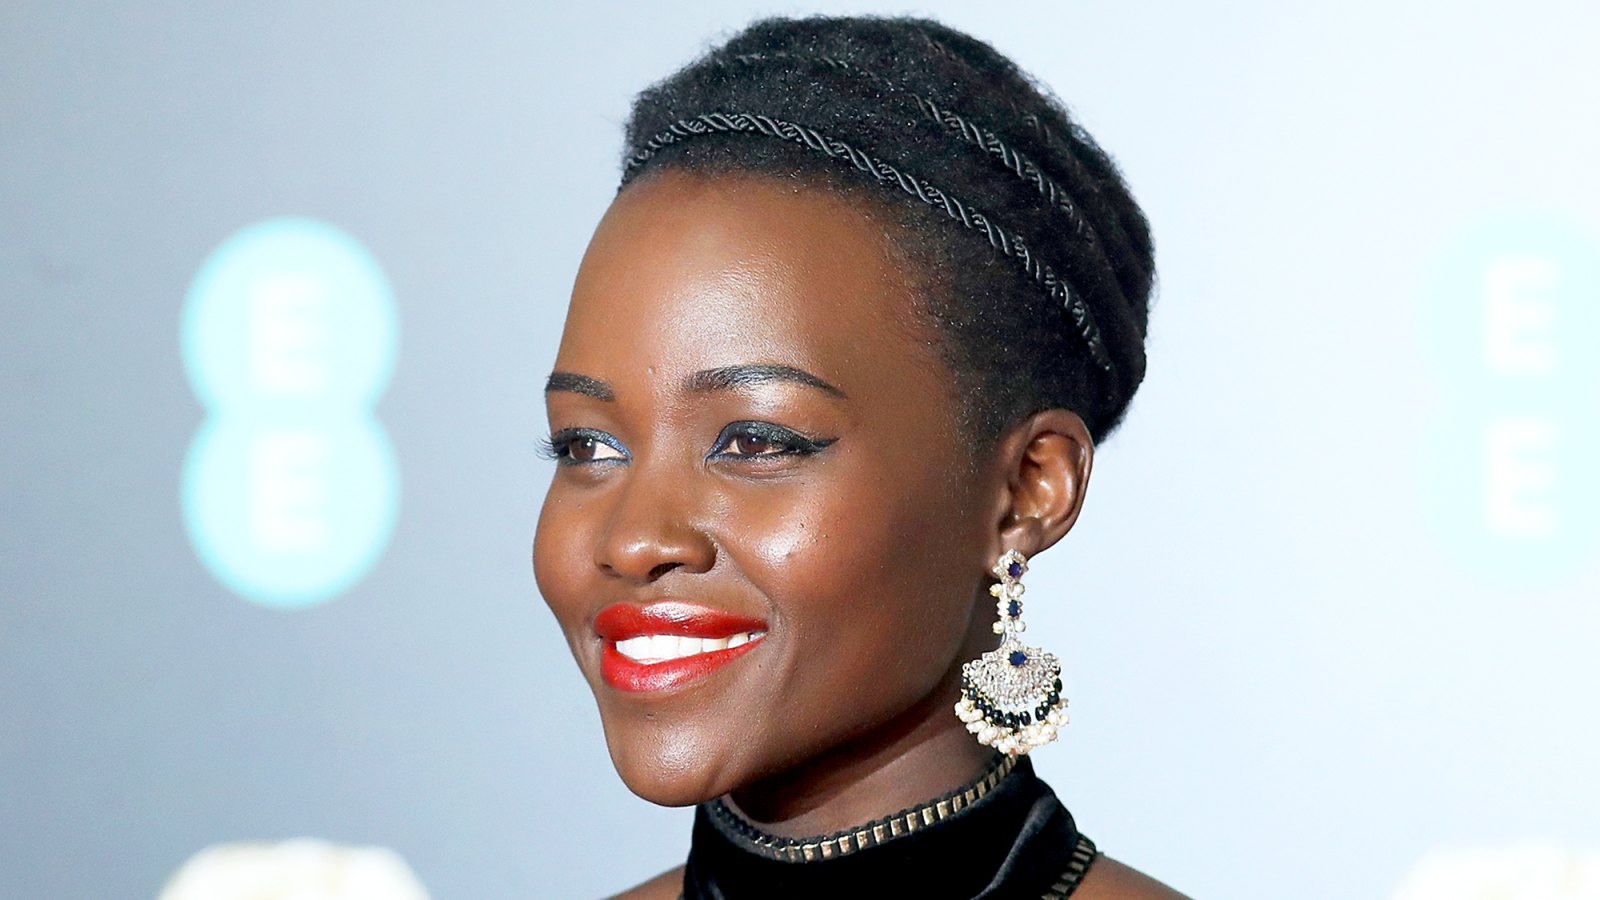 Lupita Nyong'o attends the EE British Academy Film Awards held at Royal Albert Hall on February 18, 2018 in London, England.